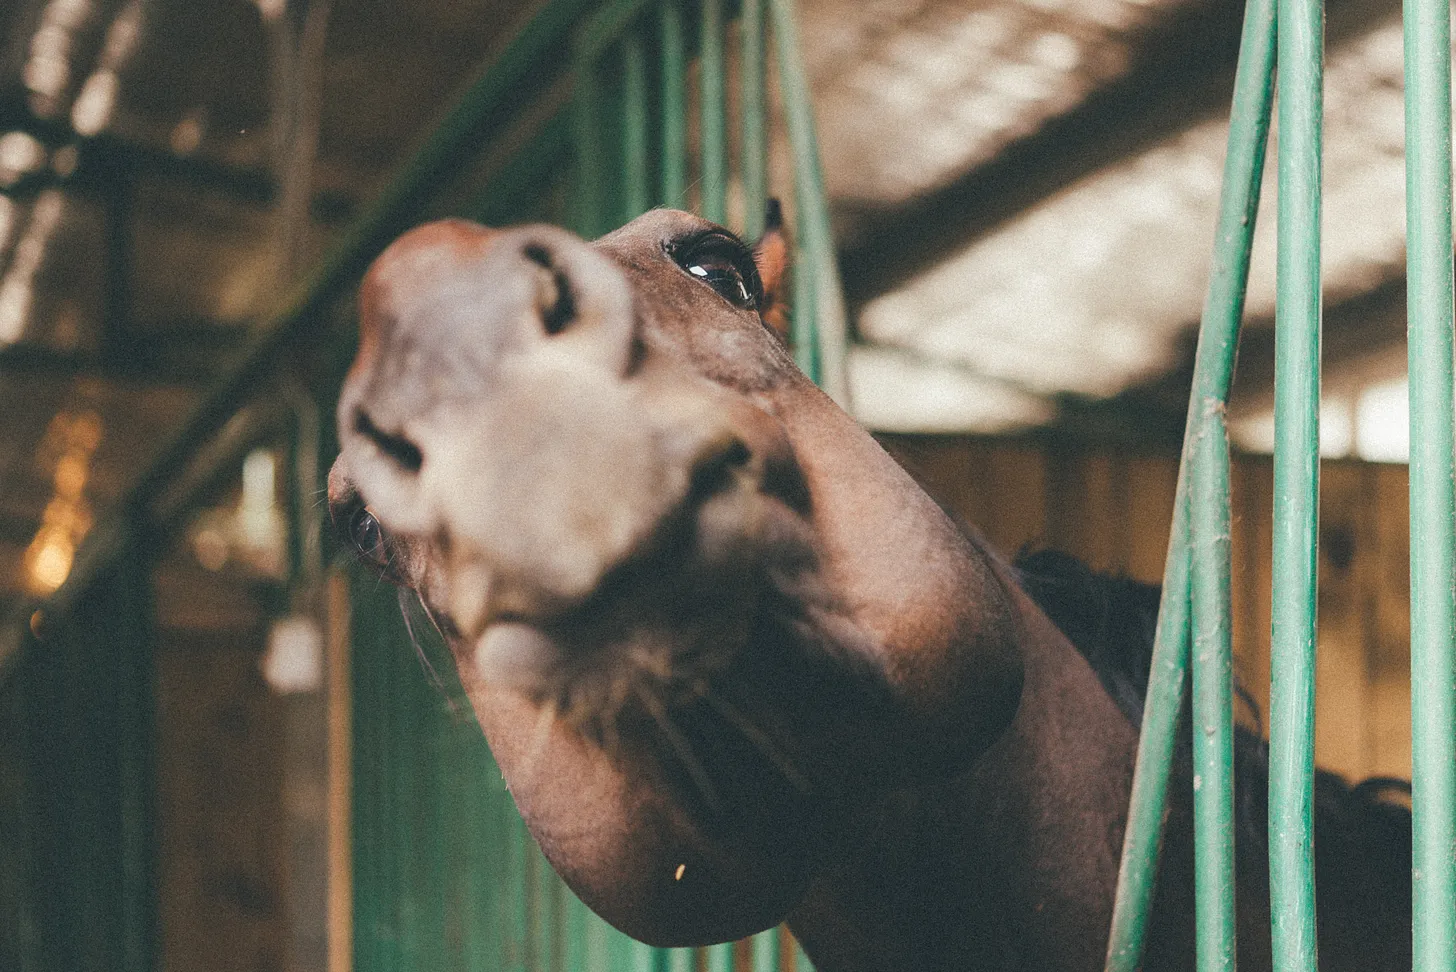 Pictures about data can get boring. Here’s a horse! Photo by Ivan Shi on Unsplash